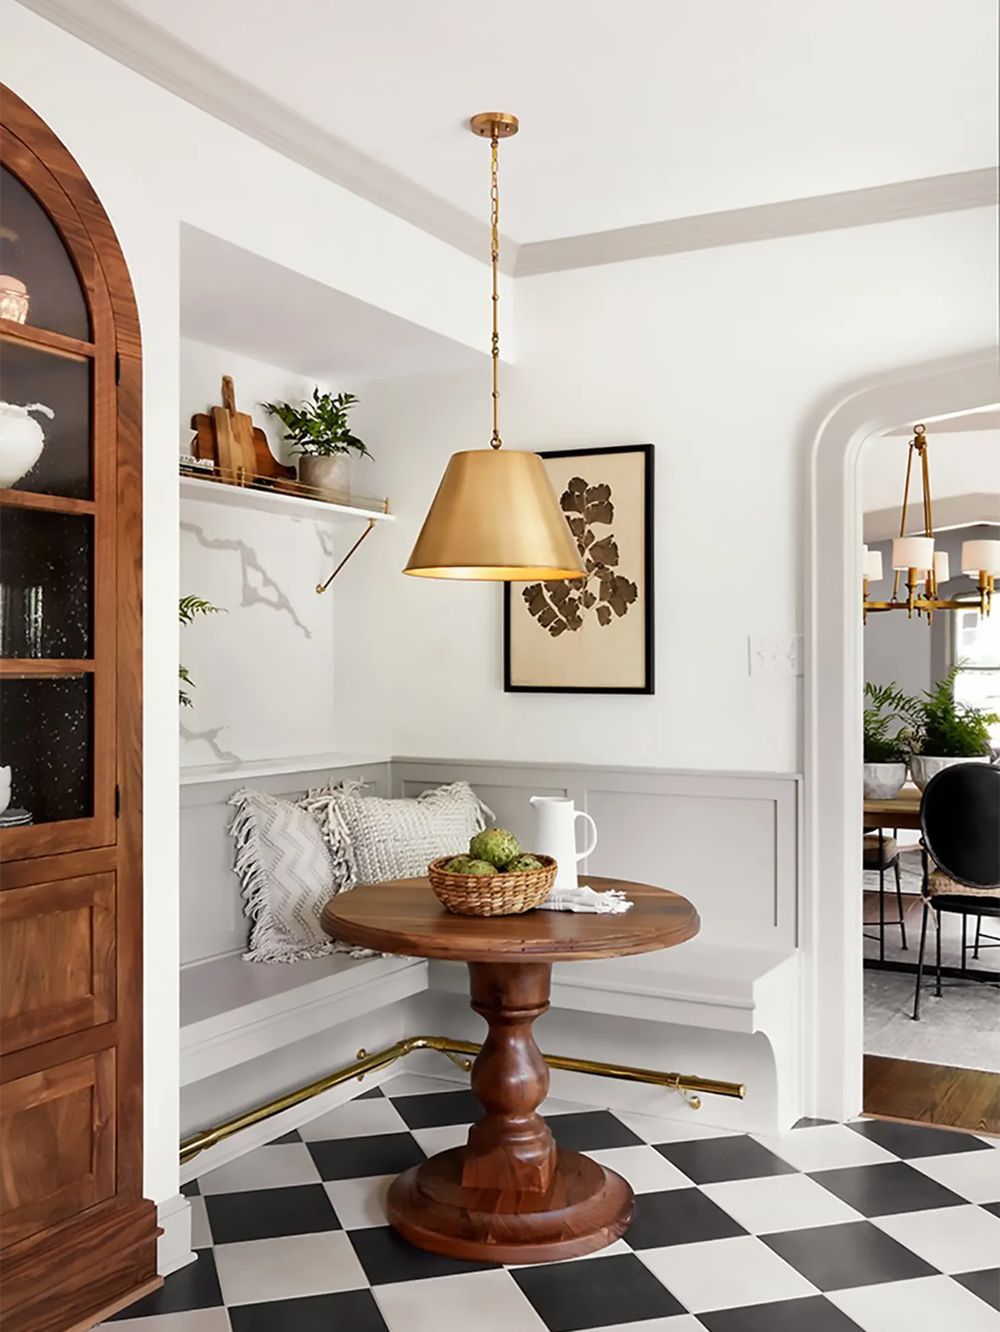 Fixer Upper Breakfast Nook with Black and White Checkered Tile Floor via Joanna Gaines